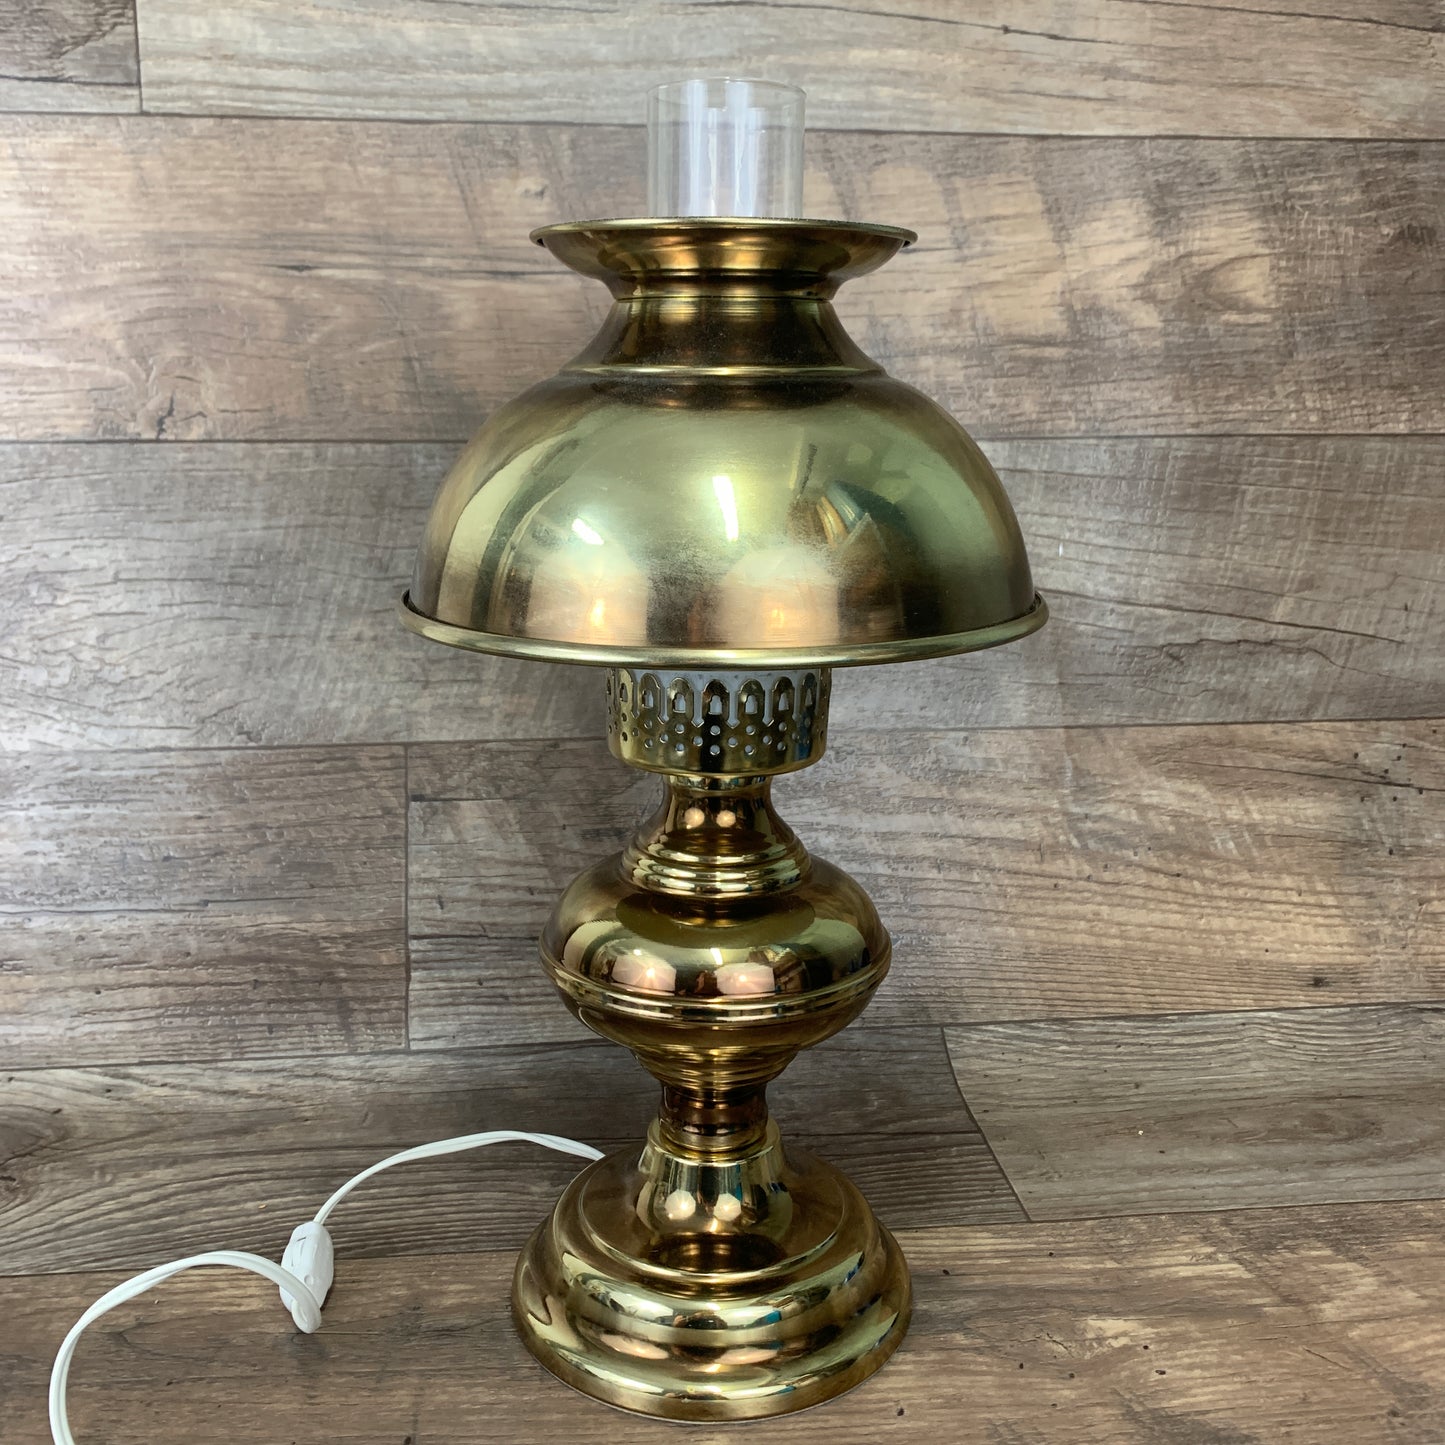 Vintage Brass Lamp, Electric Oil Lamp Style, Vintage Table Lamp